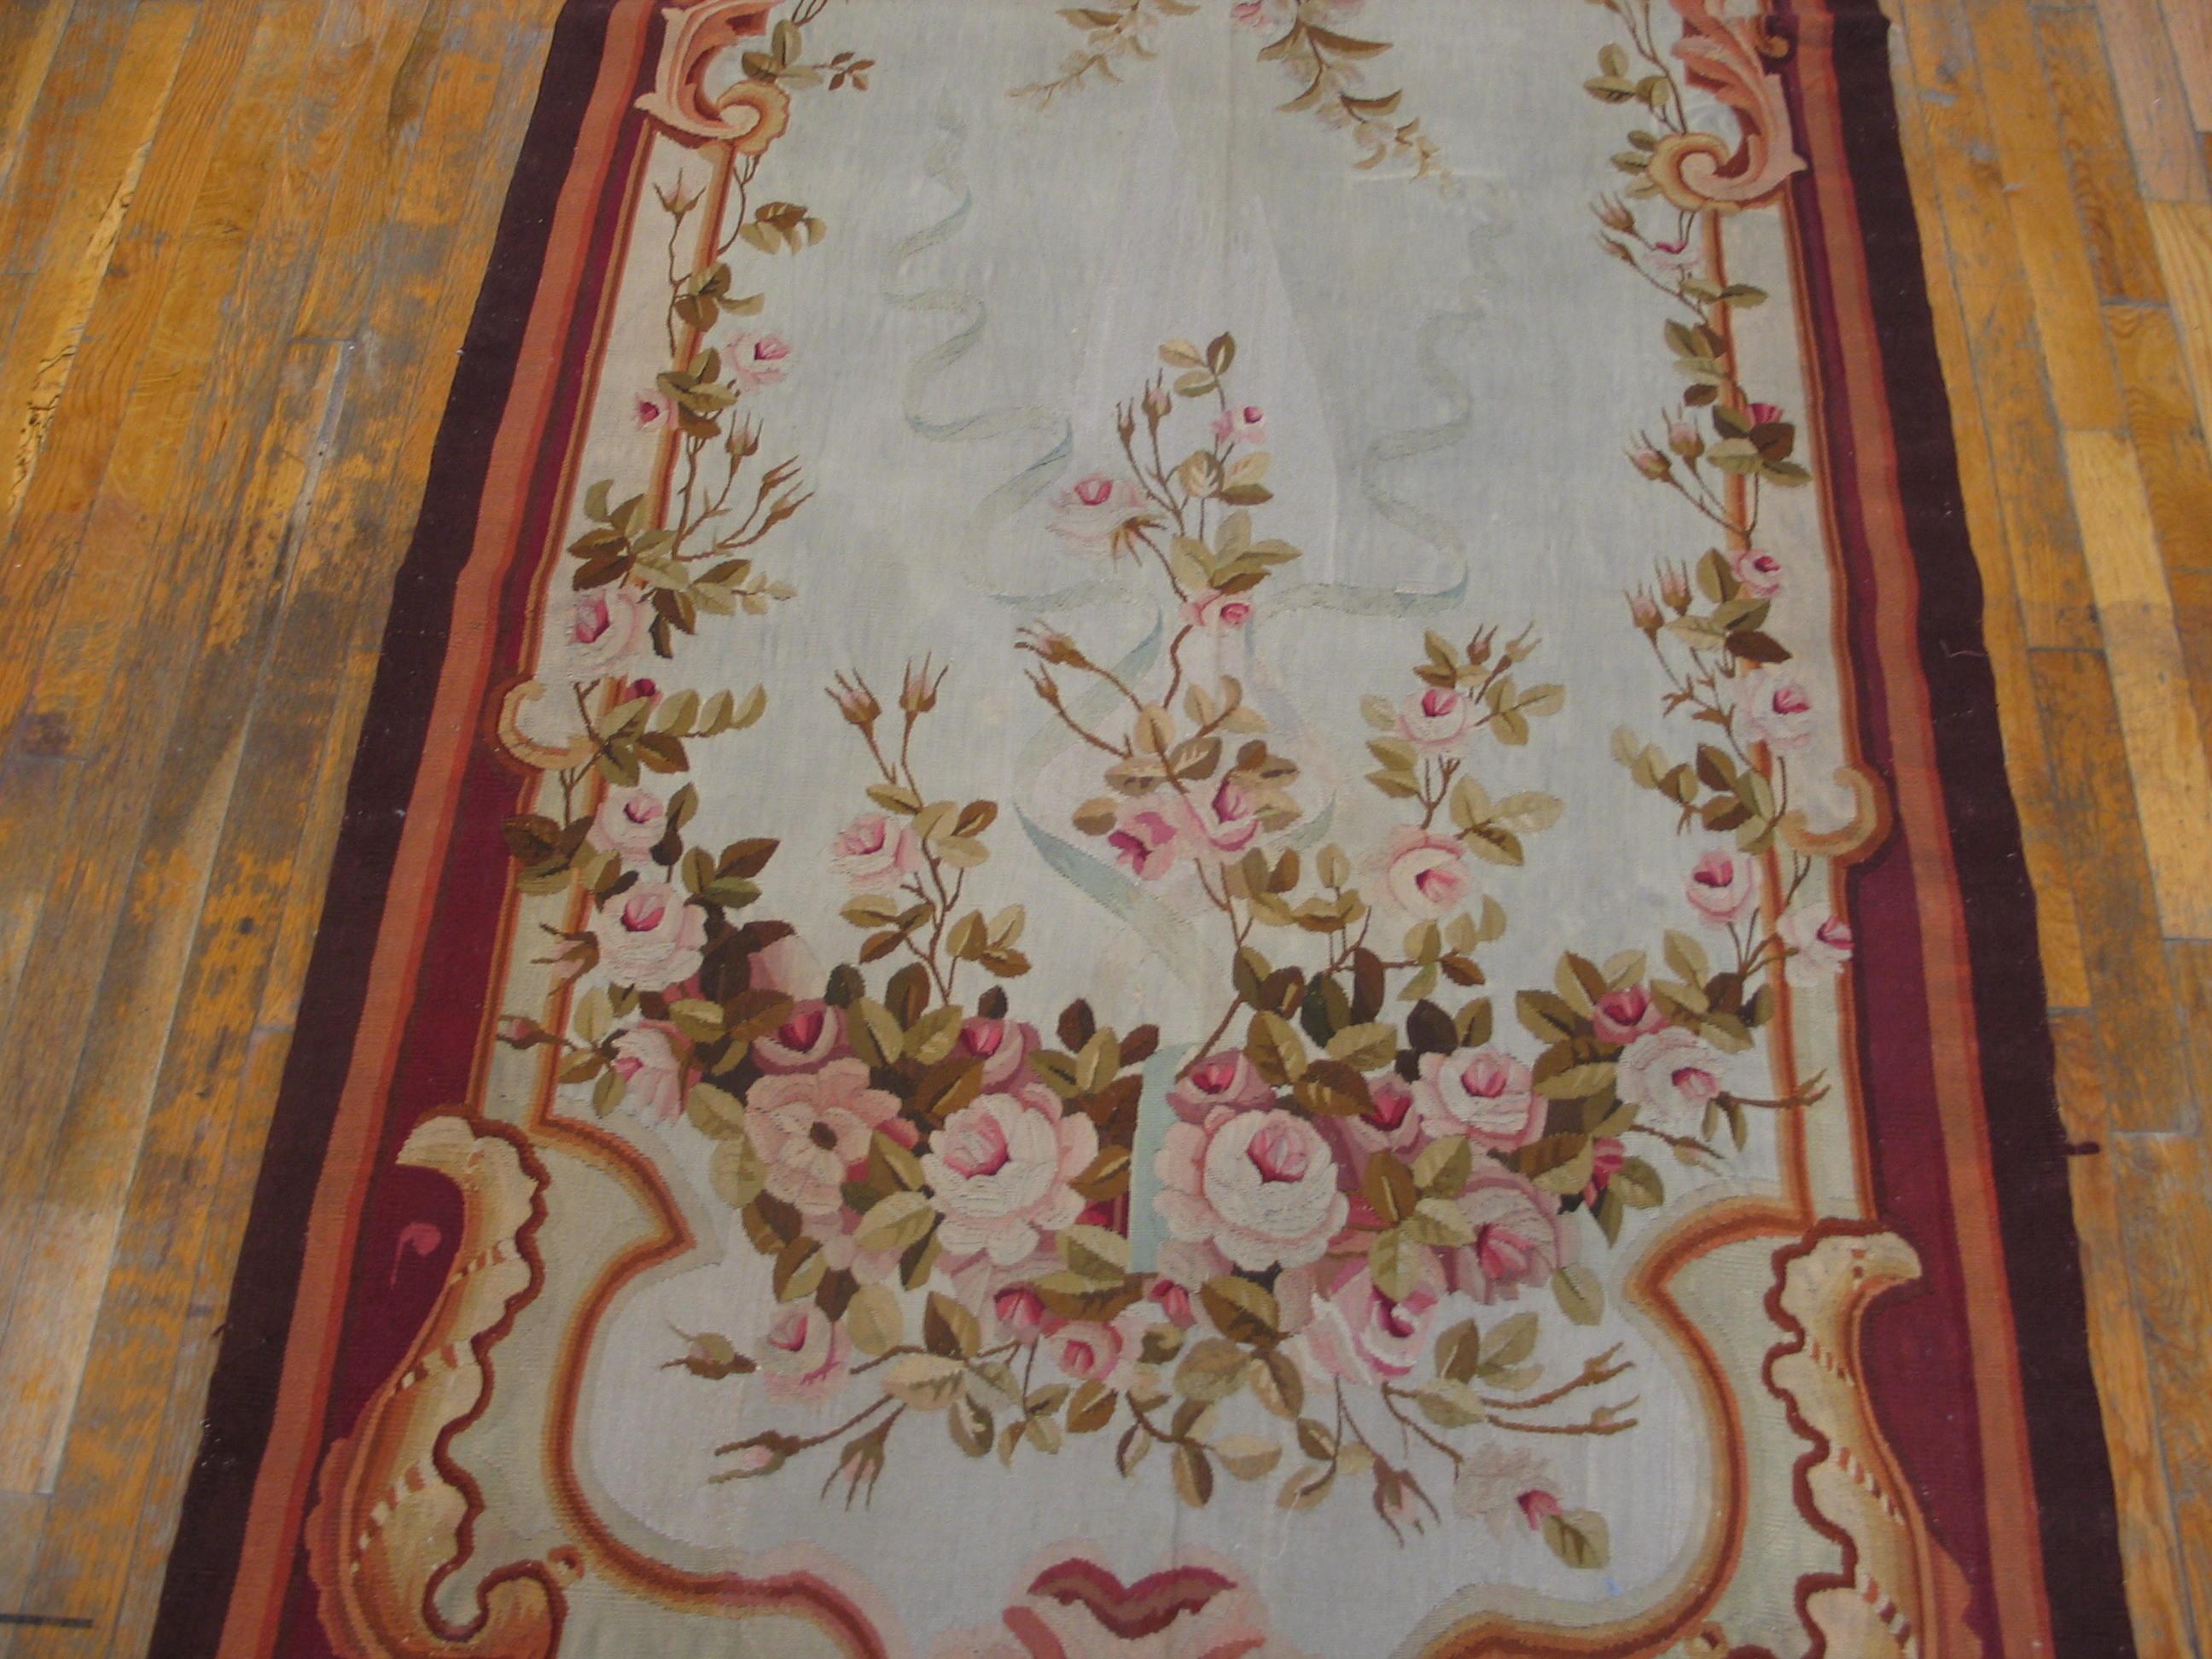 Antique European Tapestry rug, size: 3'9